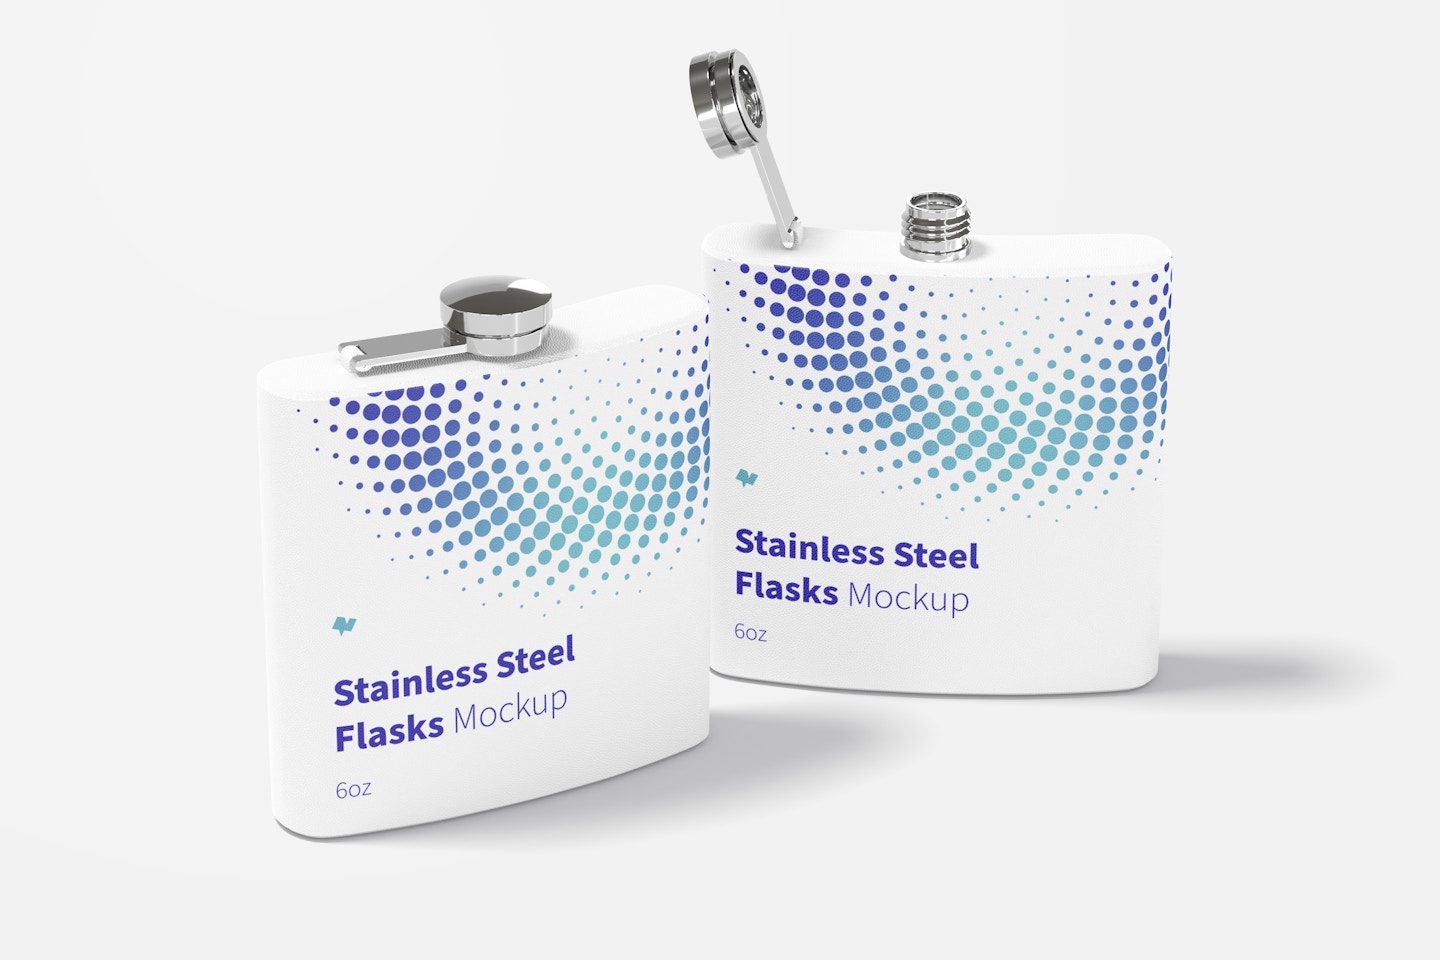 Powder Coated Stainless Steel Flasks Mockup